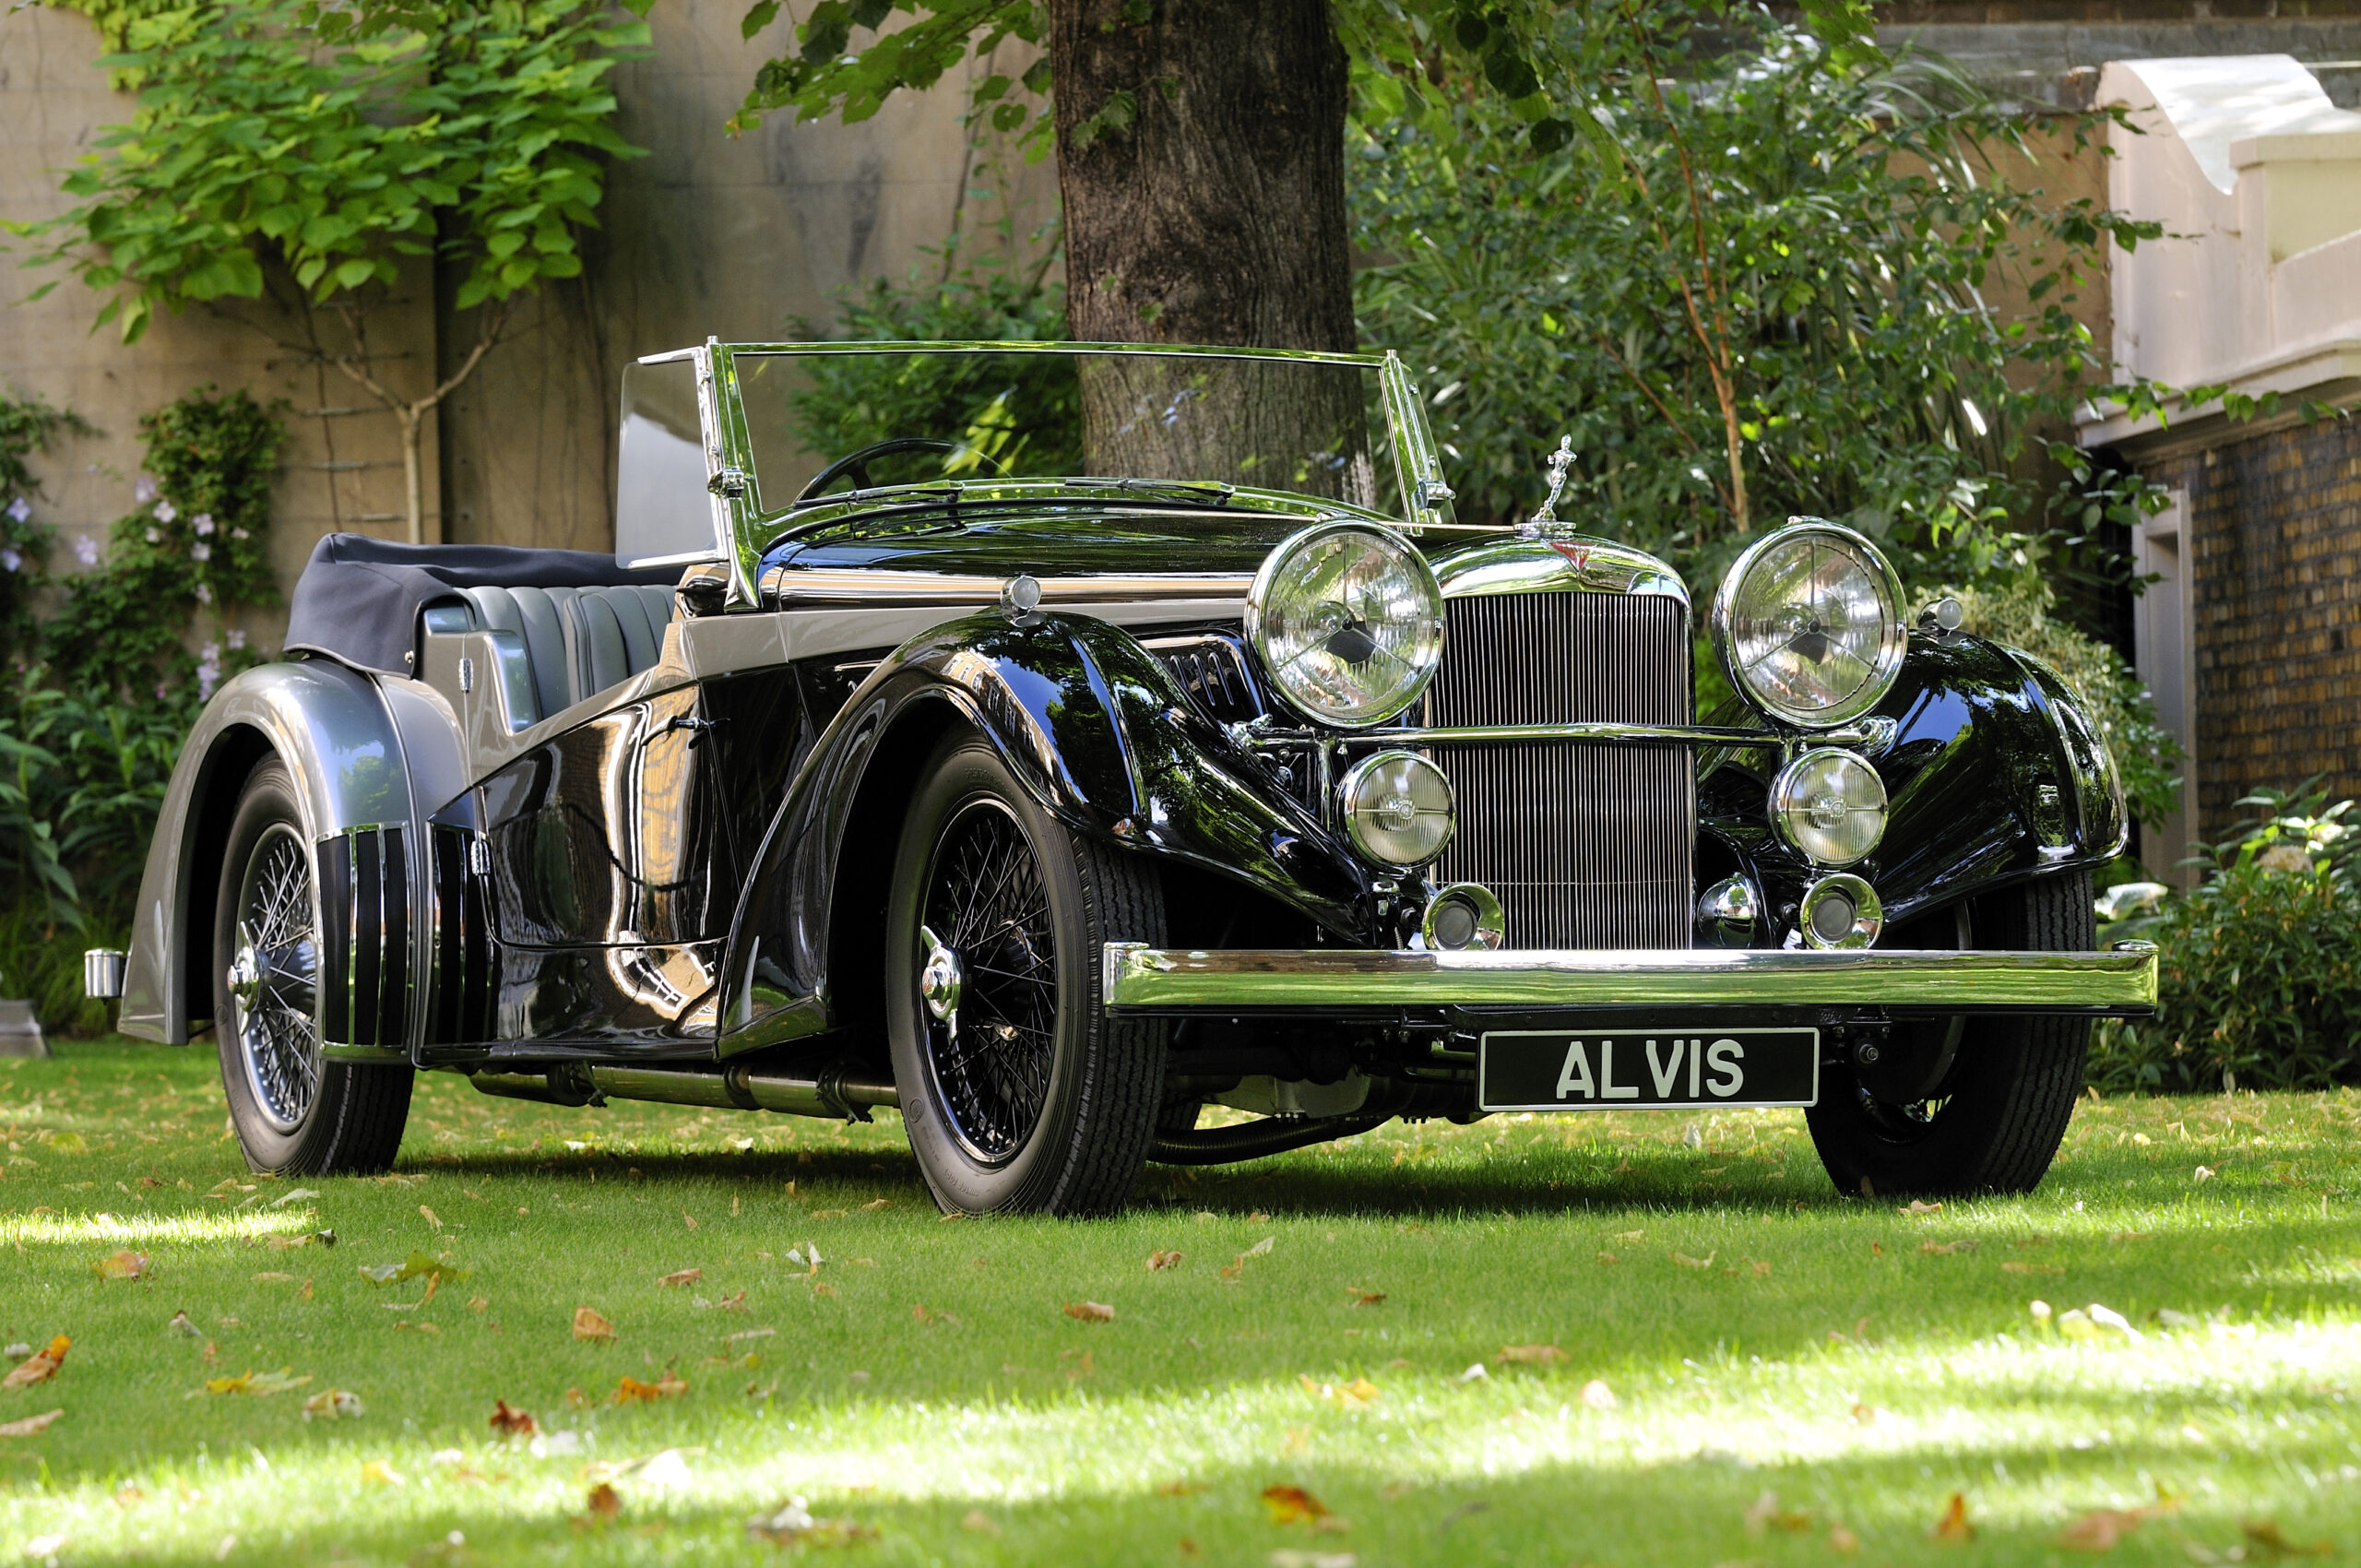 Driving a £325,000 Alvis Turned Me into Mr. Toad